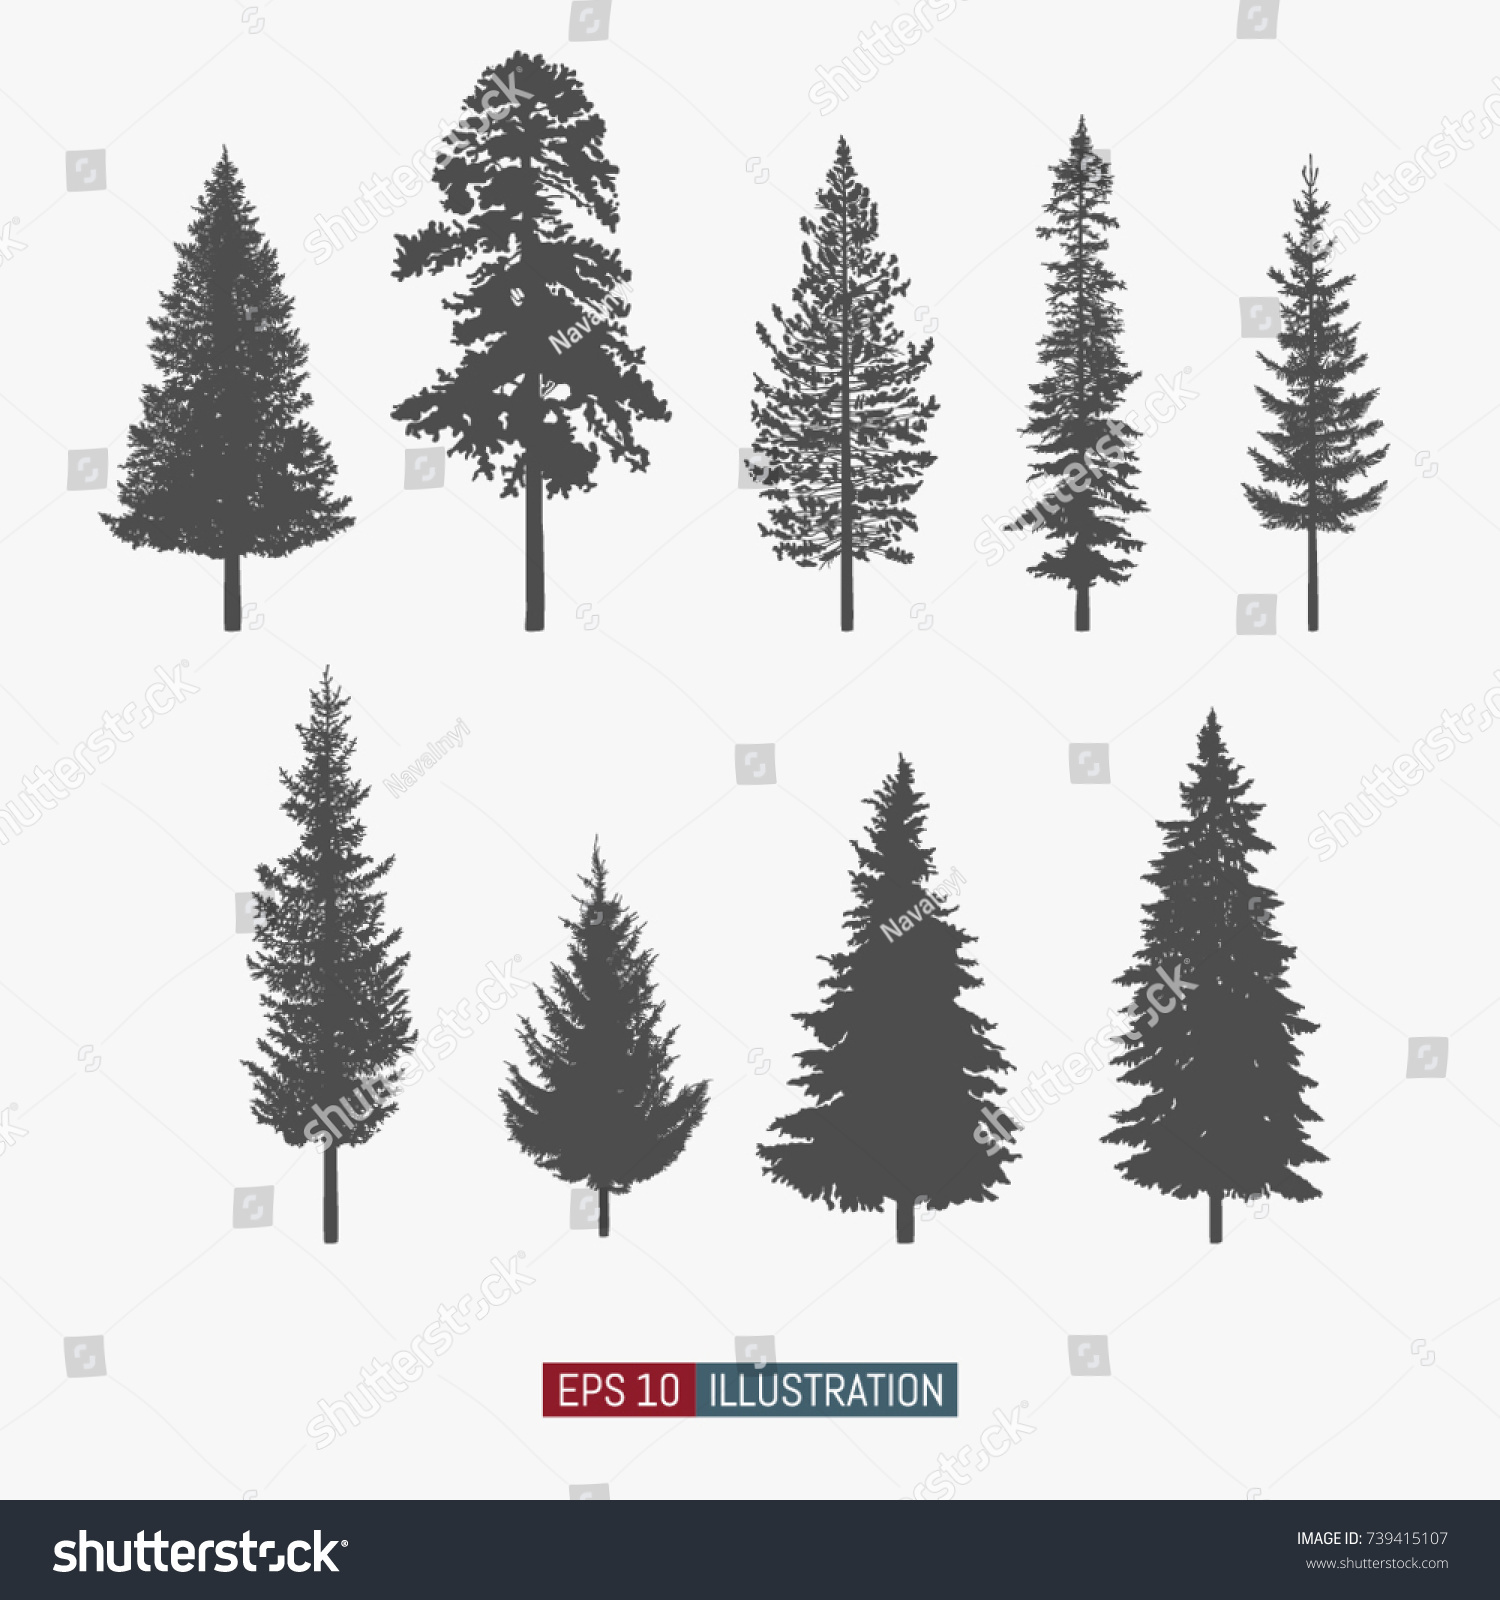 Coniferous tree isolated silhouettes set. Pine tree and fir tree flat icons. Elements for your design works. Vector illustration. #739415107